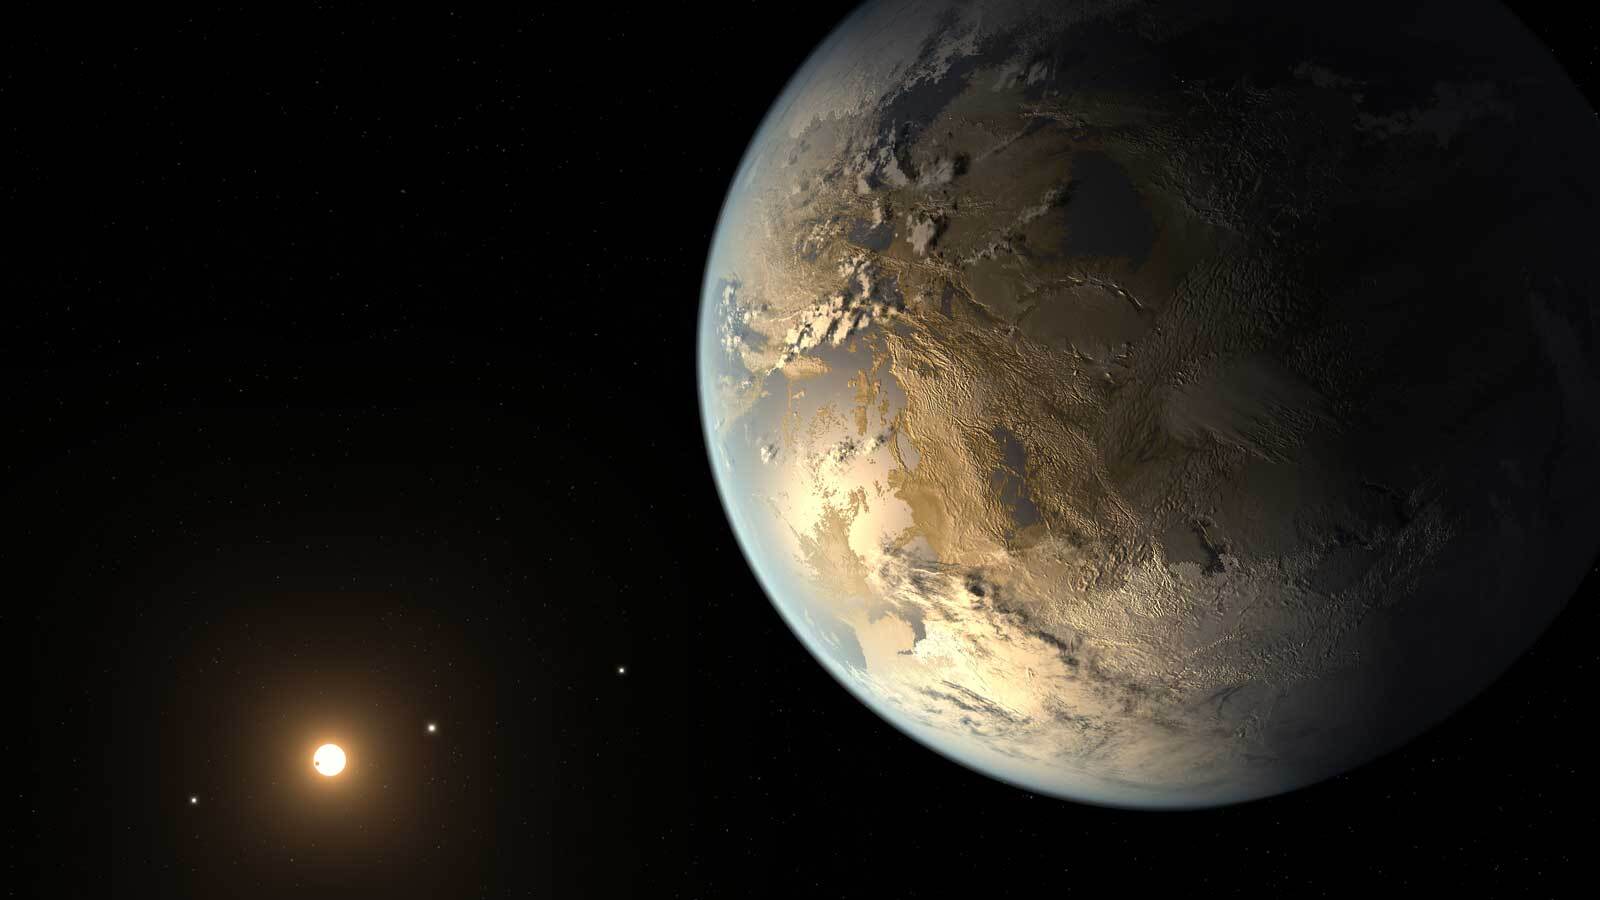 Proxima b, Closest Potentially Habitable Alien Planet to 